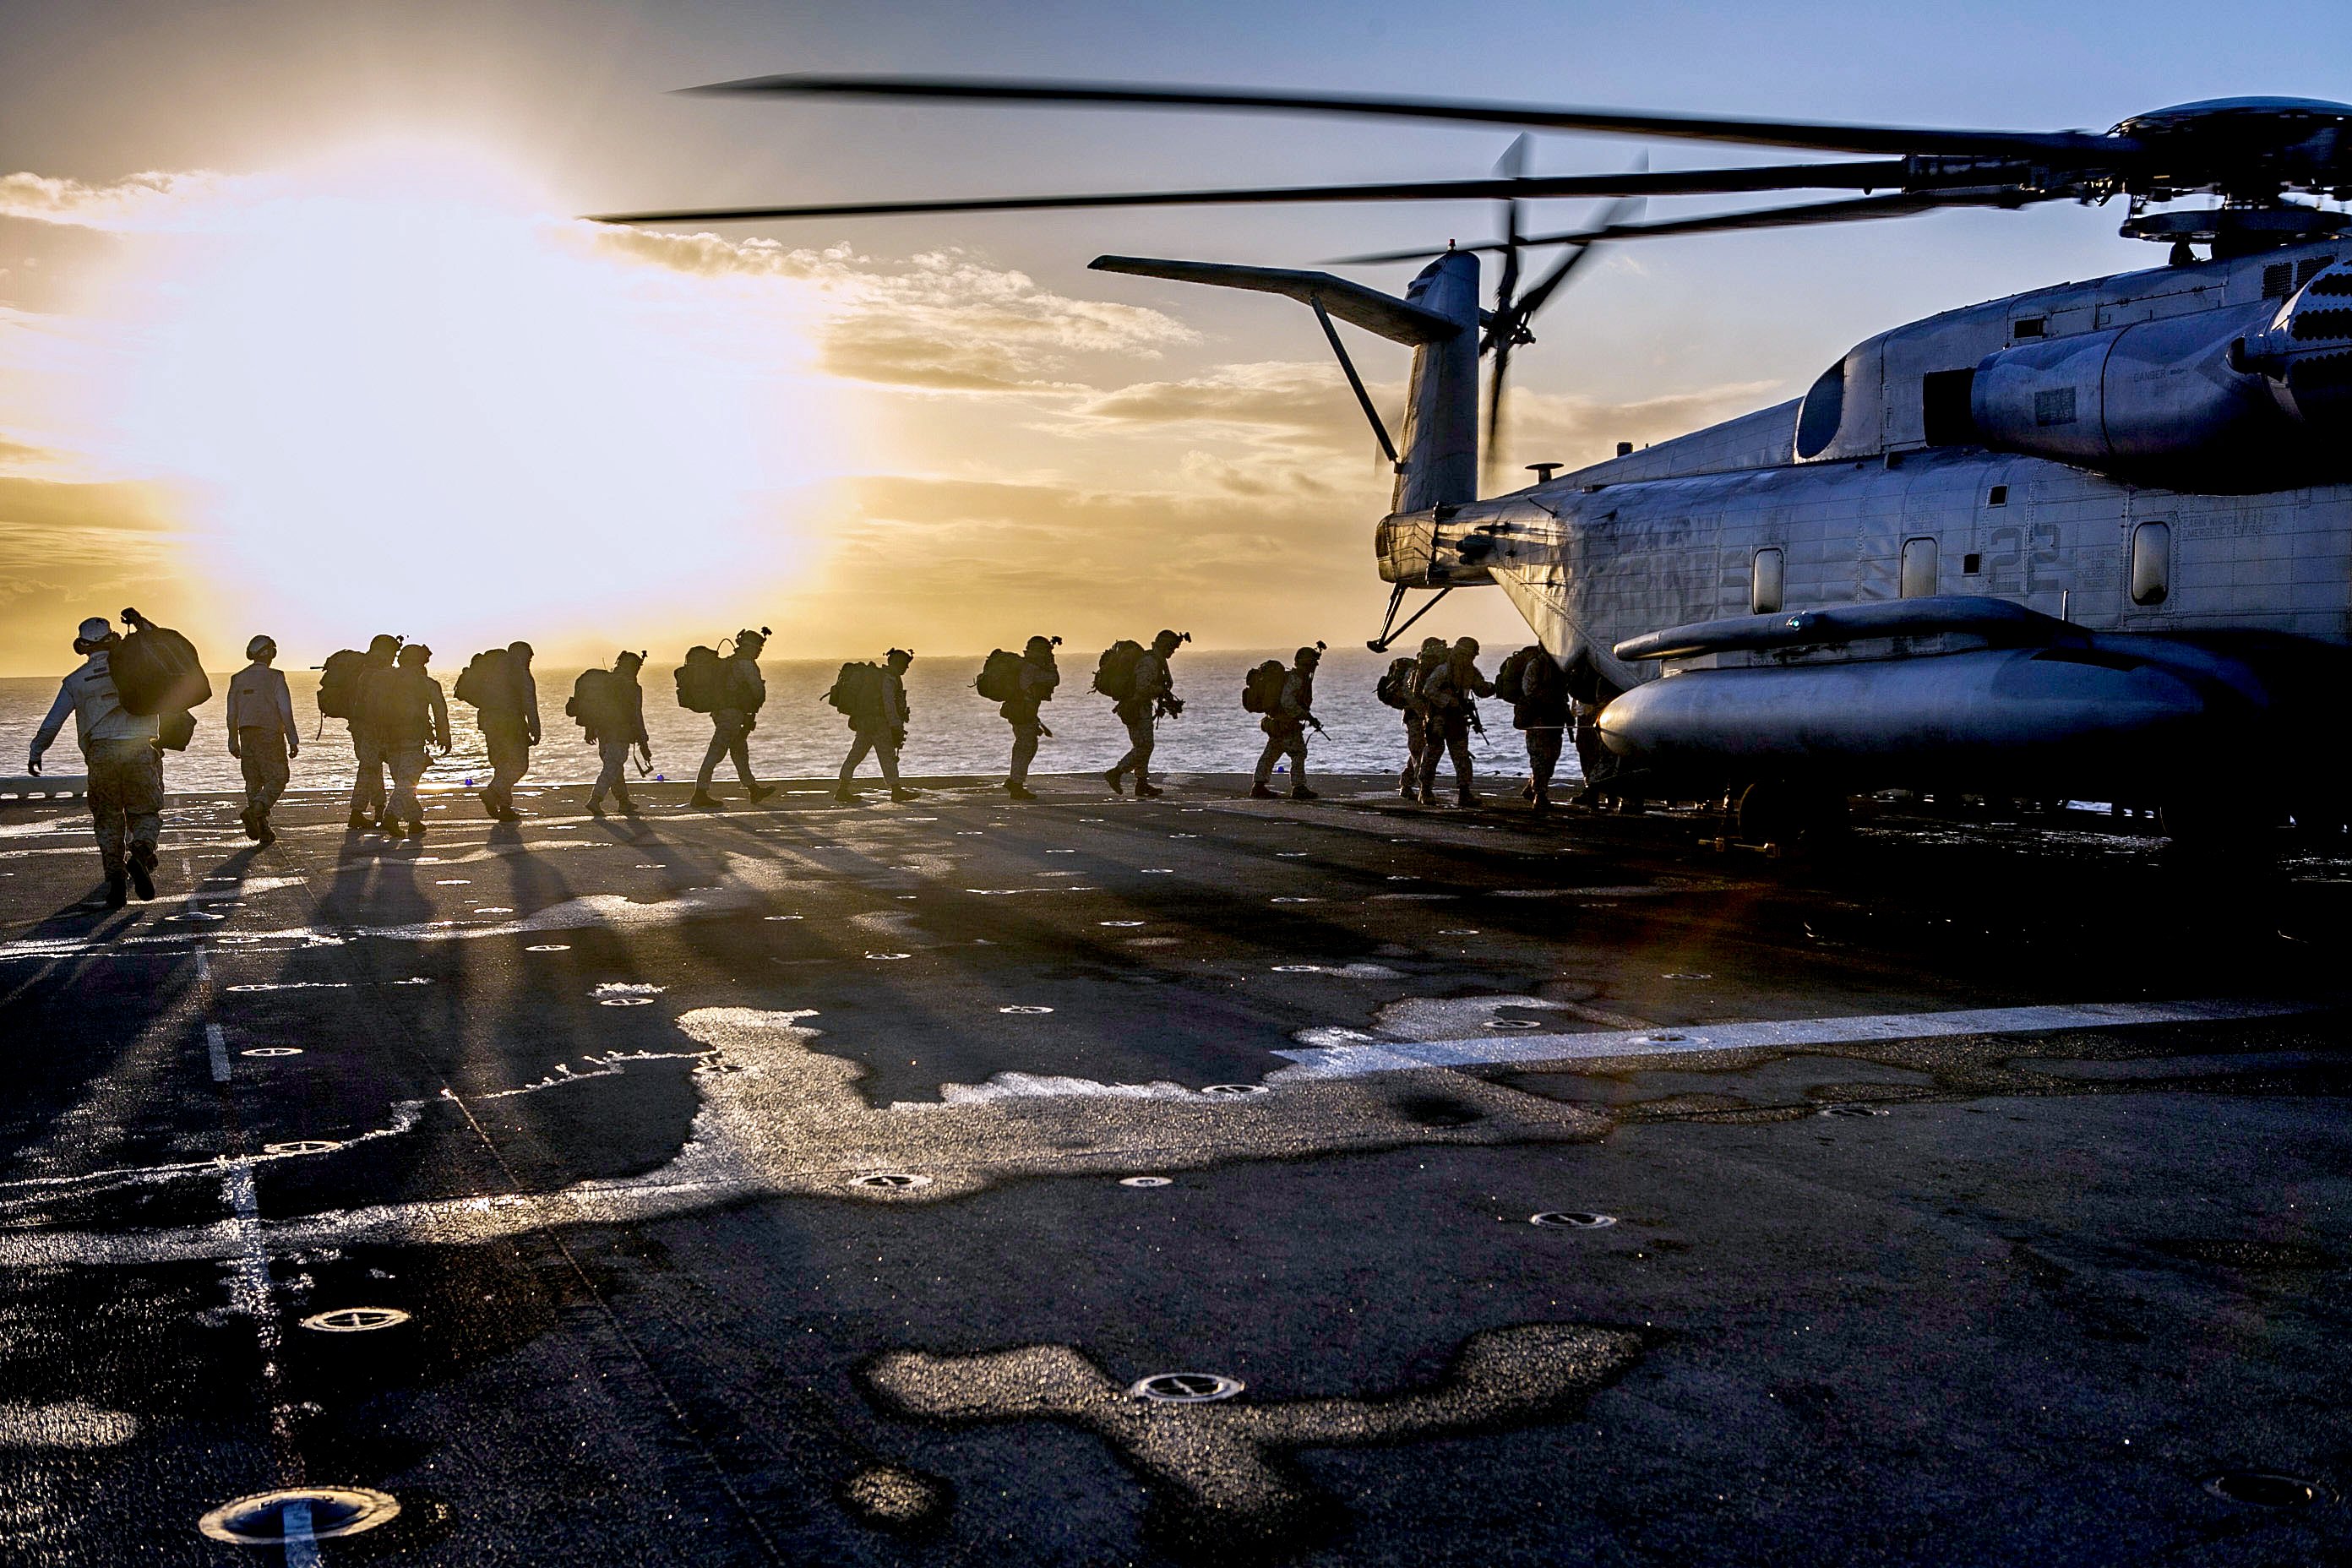 ch 53e, Super, Stallion, Helicopter, Military, Marines,  62 Wallpaper